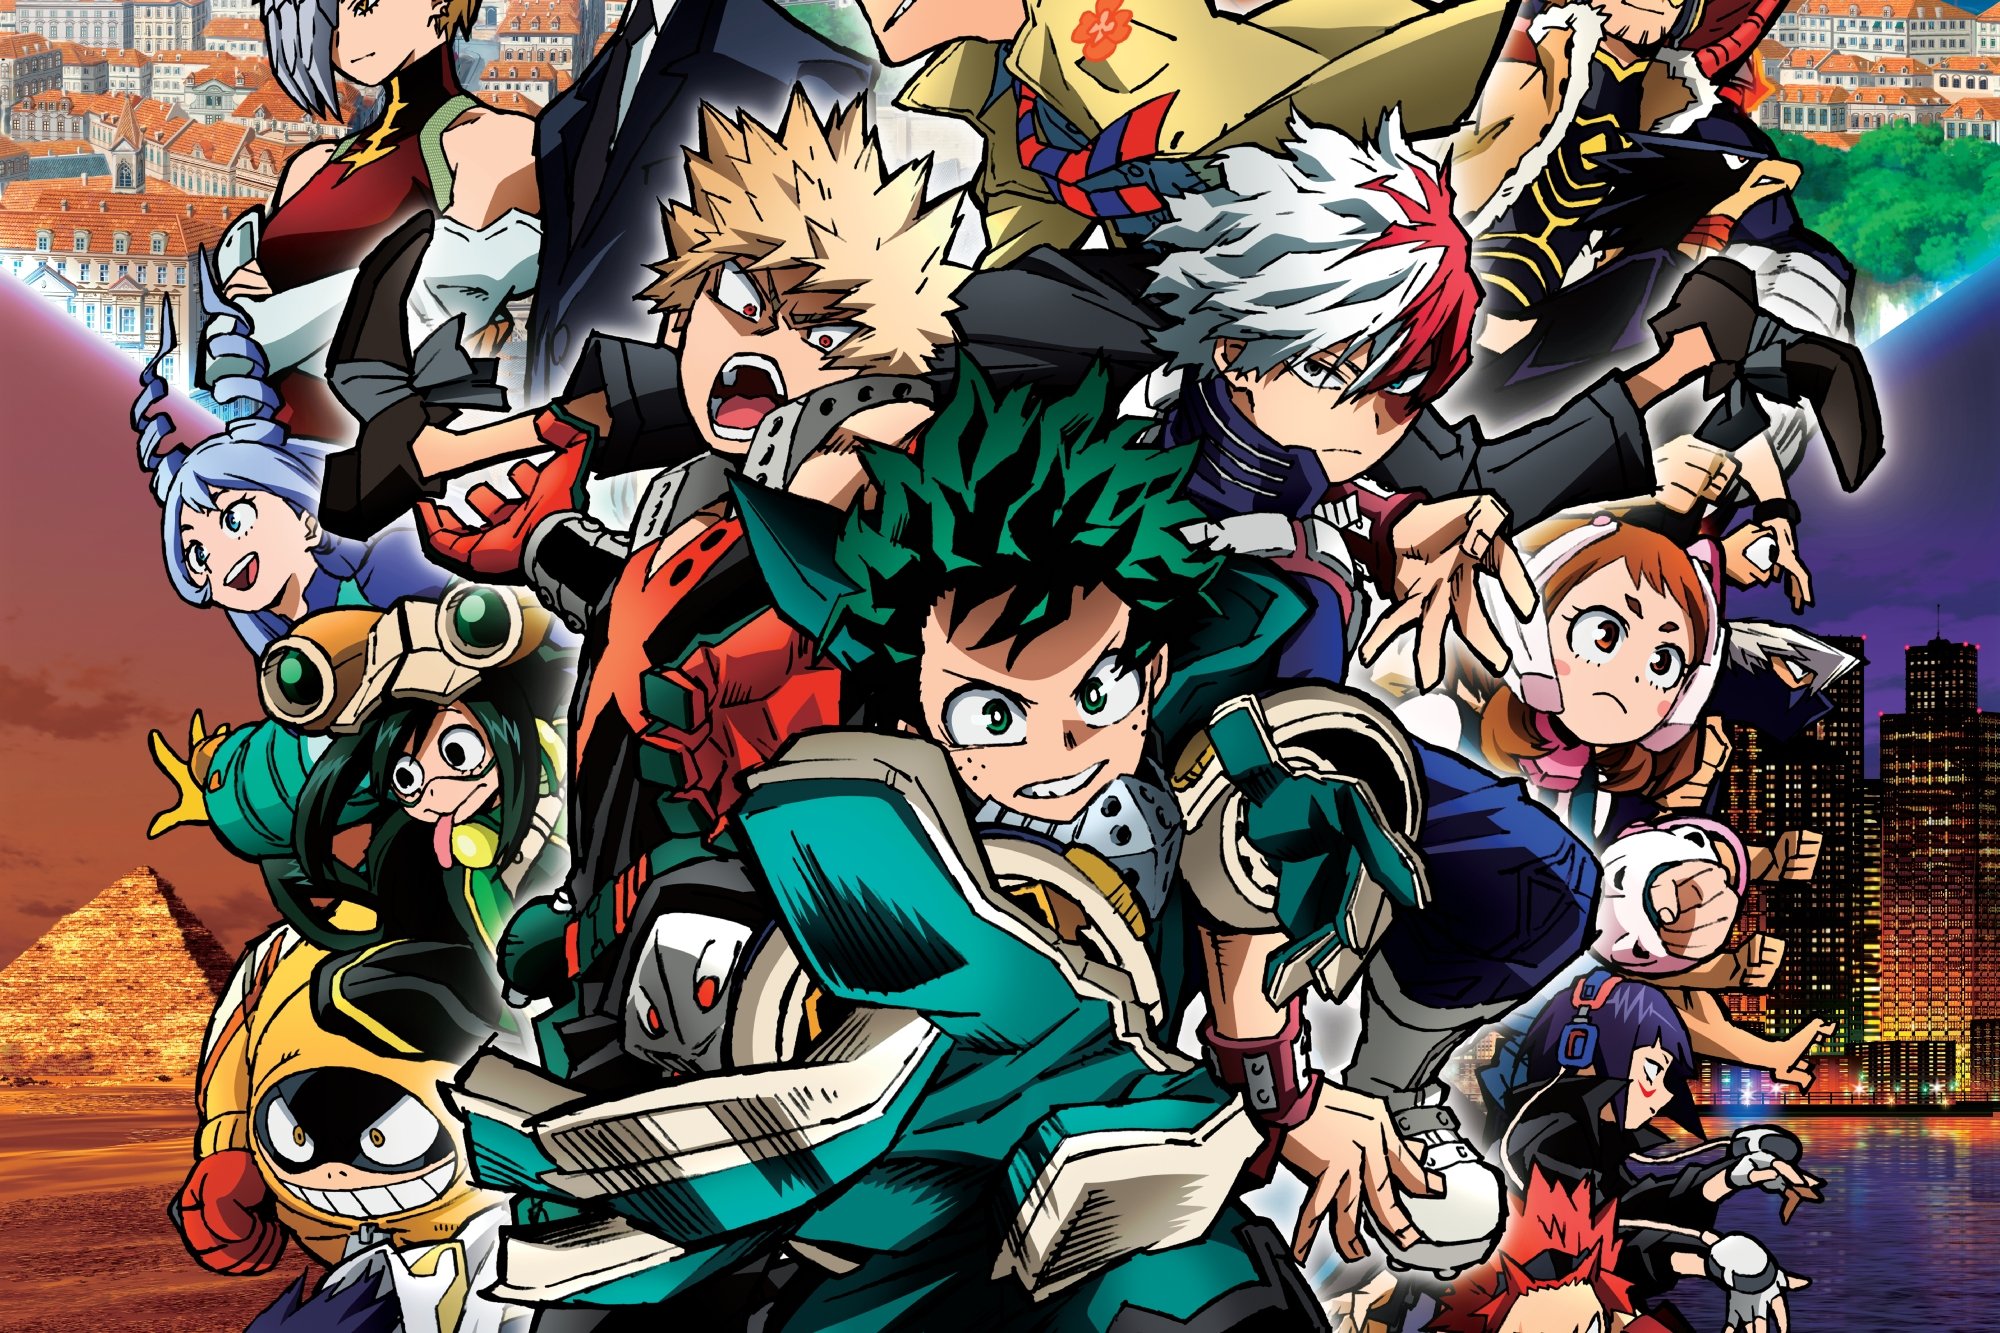 My Hero Academia Season 6 Announces Release Date for First Episode!